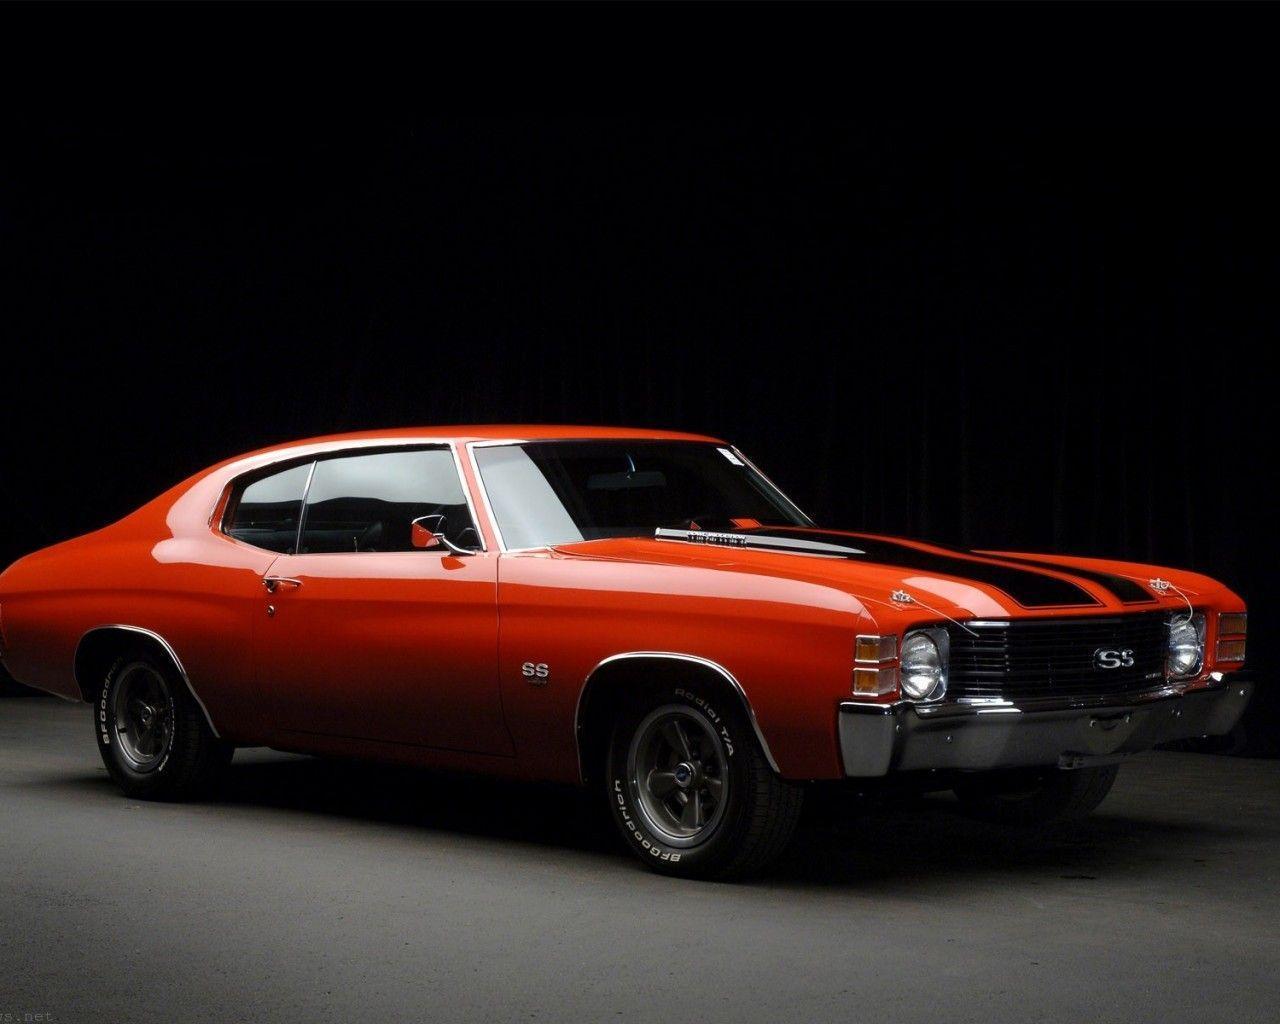 Red Chevy Muscle Car Wallpaper